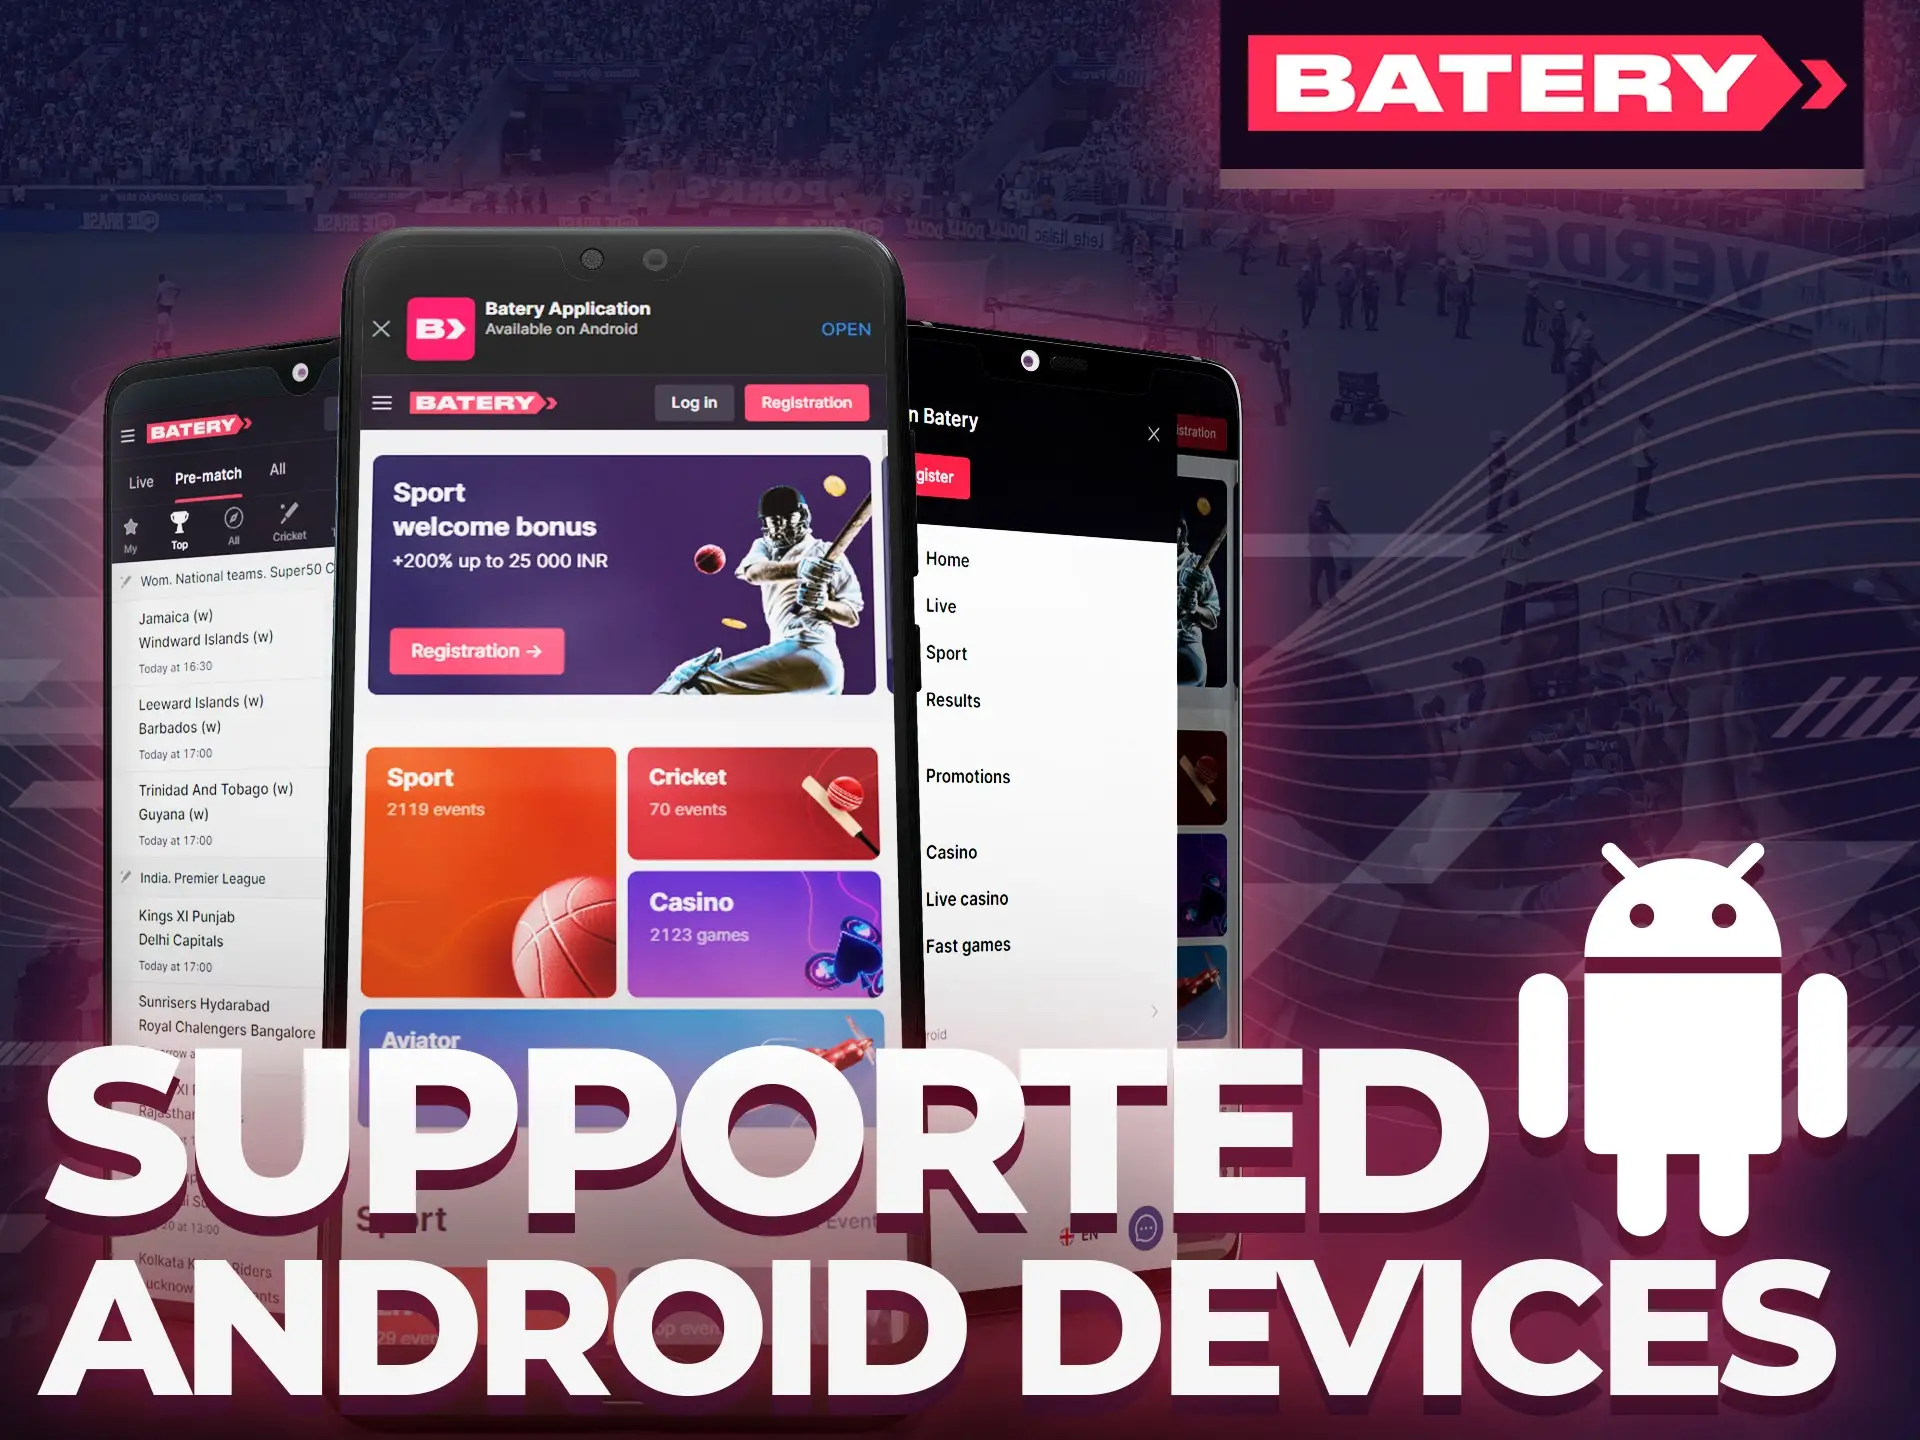 Batery app supports almost all Android devices.